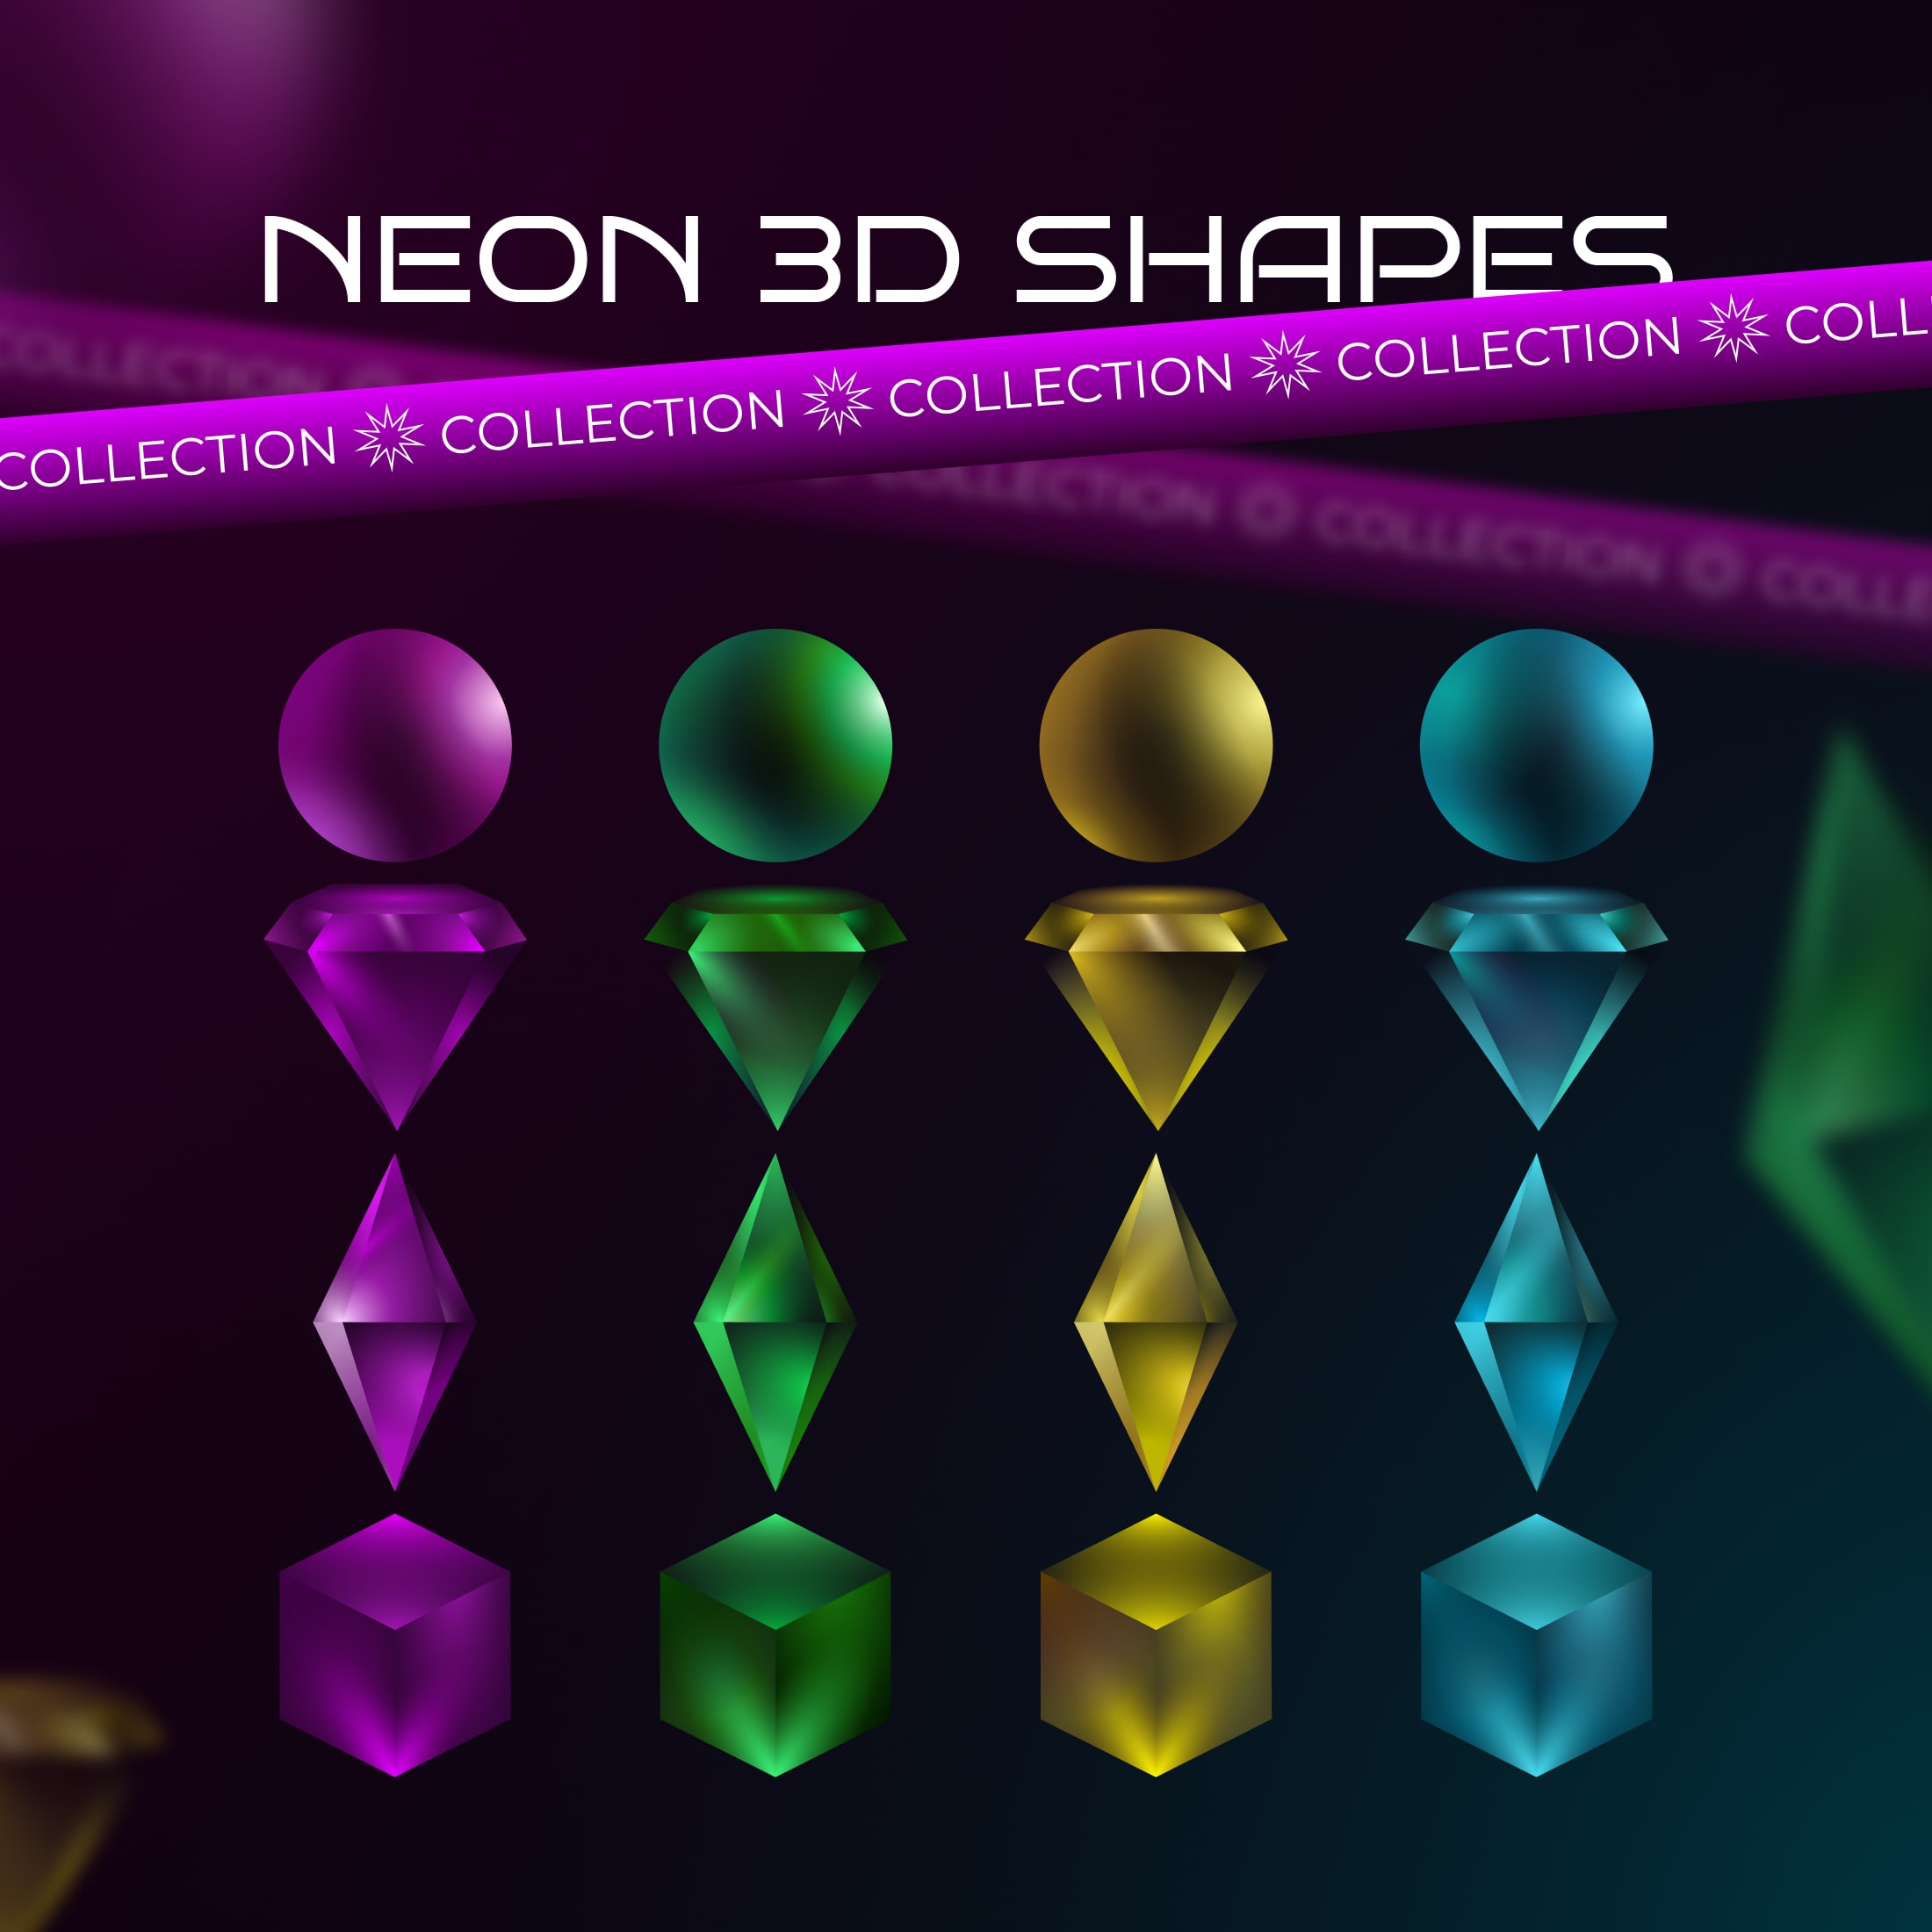 10+ Top 3D Neon Shapes cover image.